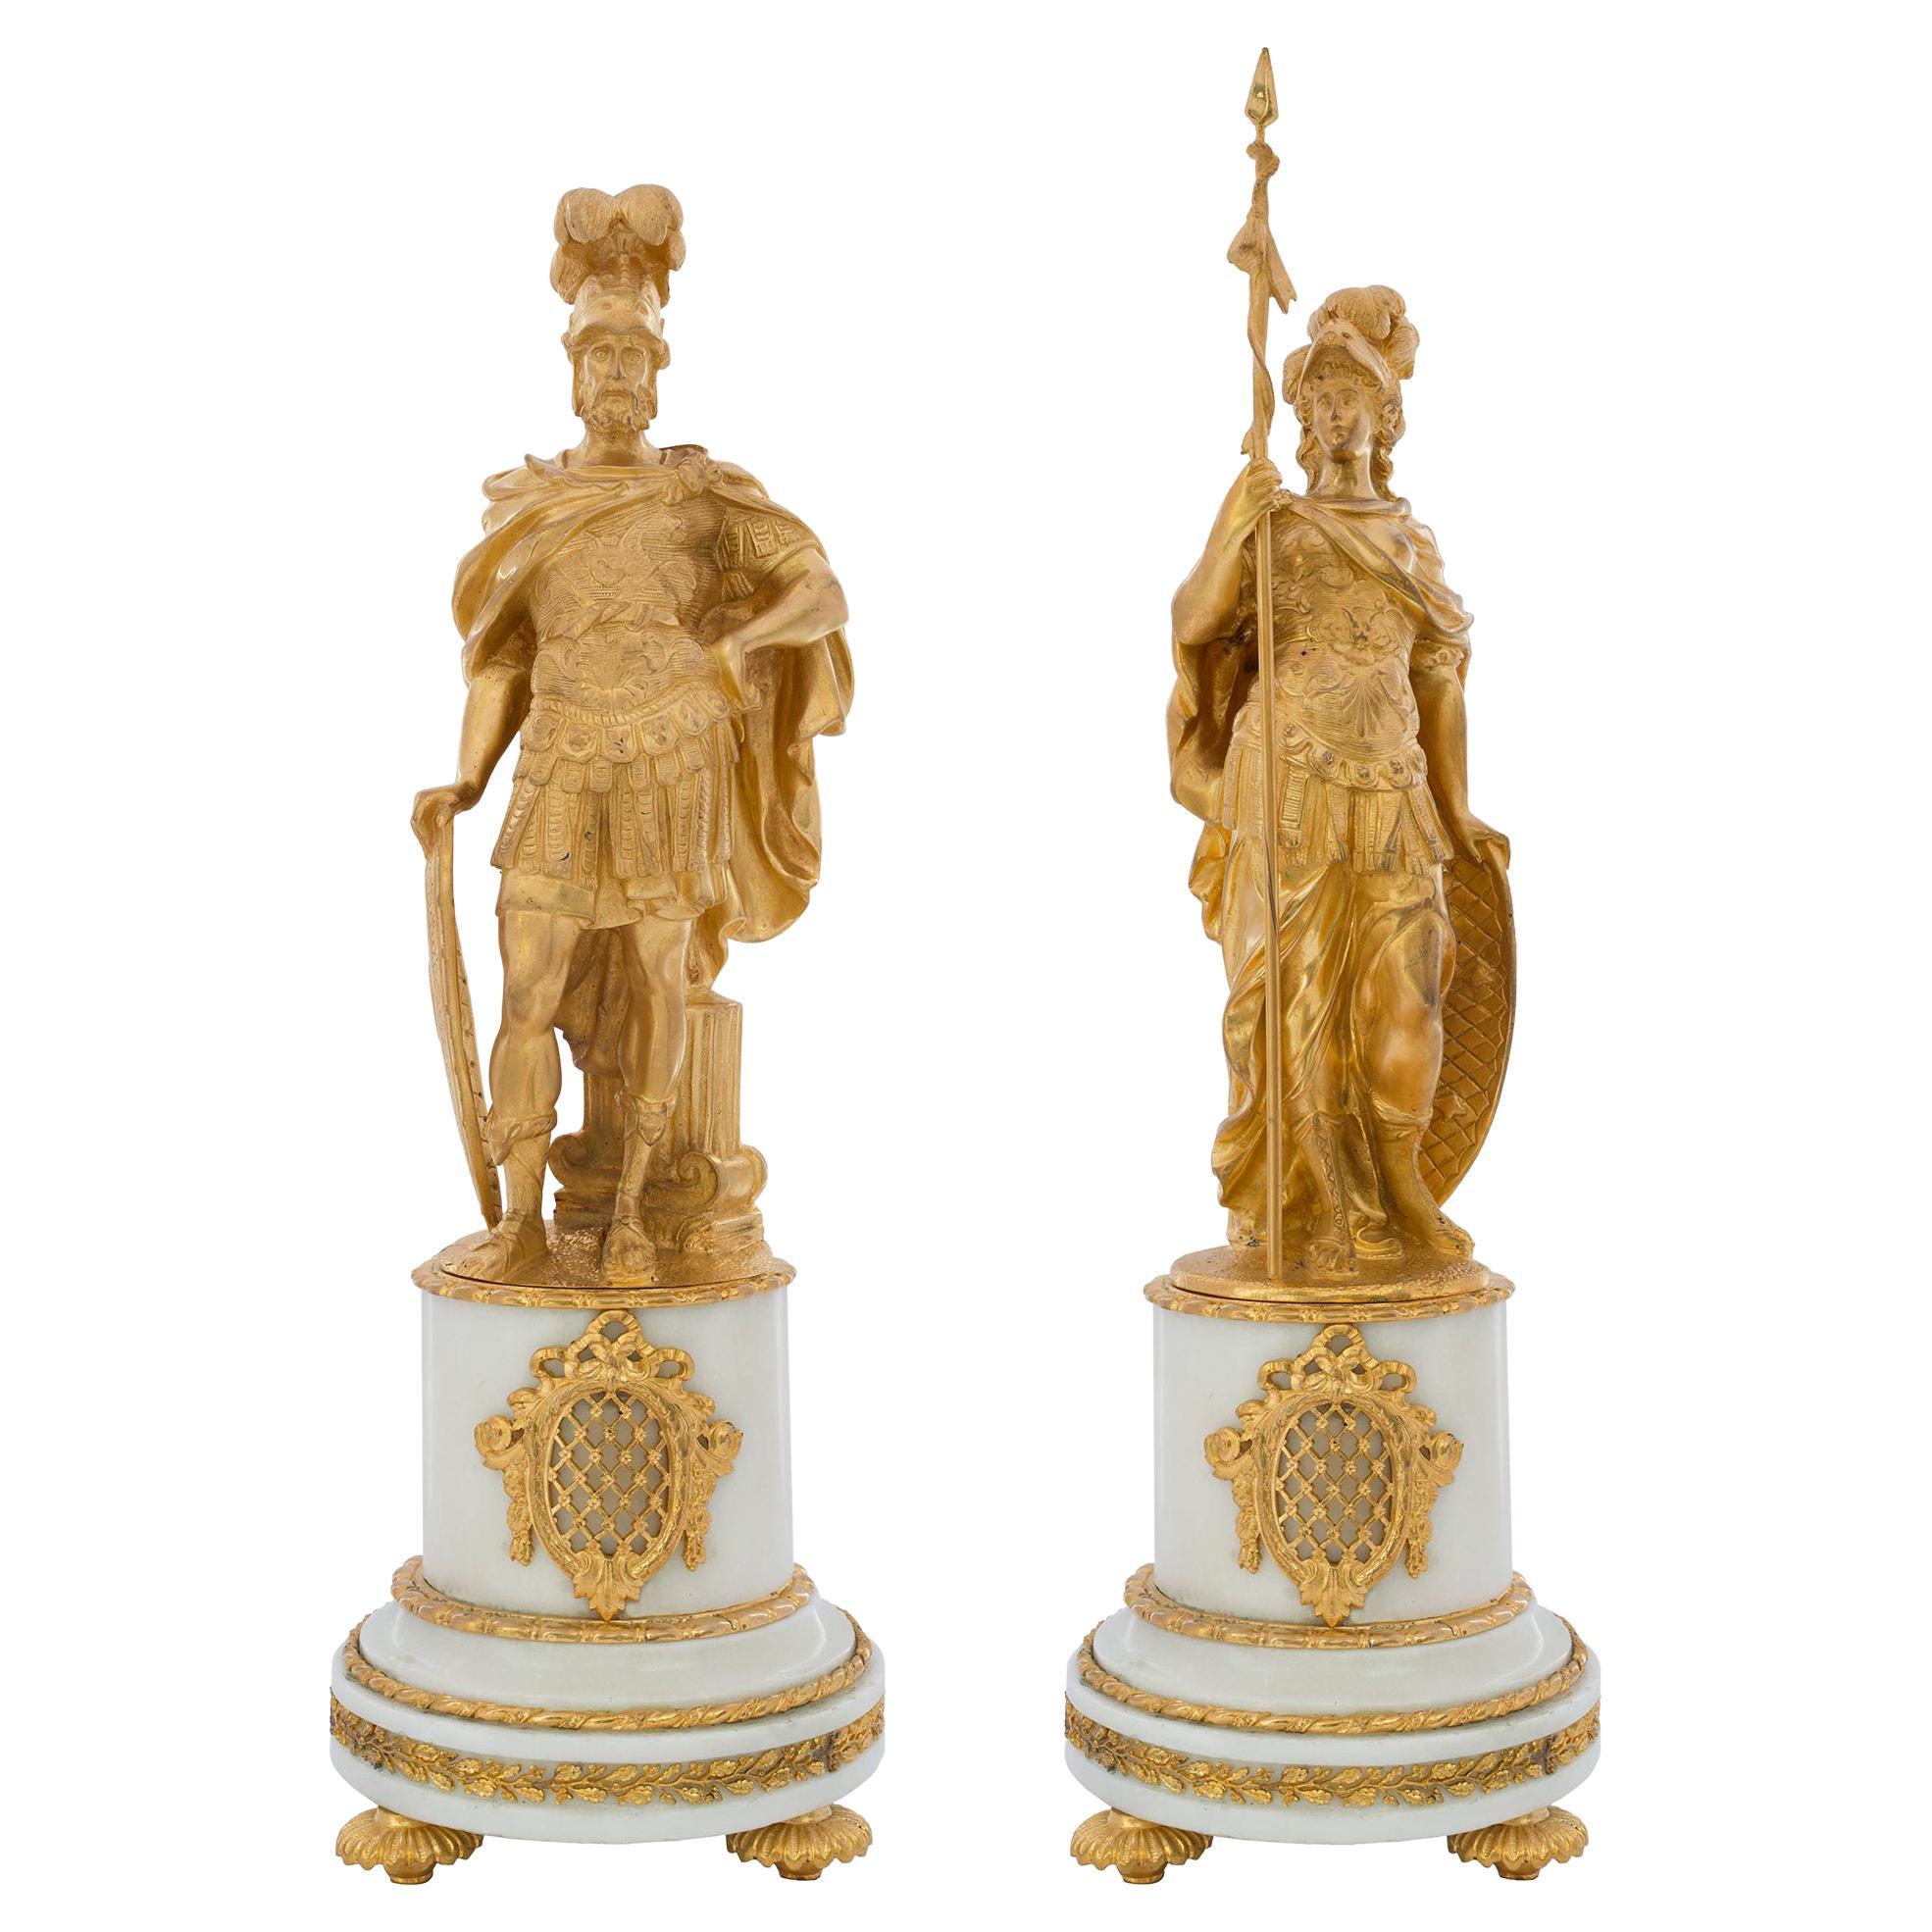 Pair of French Louis XVI Style 19th Century Statue Depicting Mars and Minerva